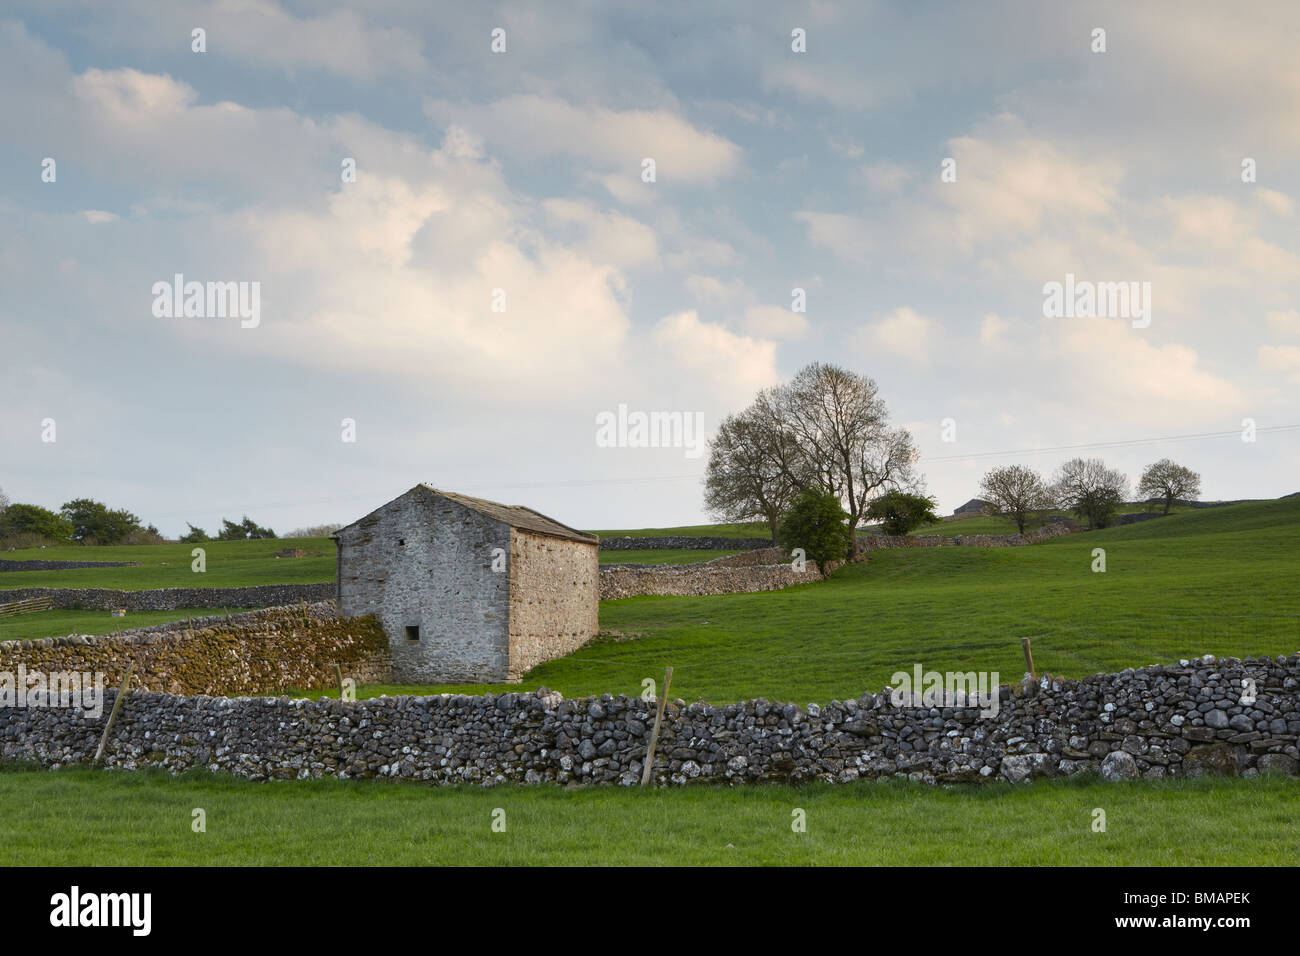 Yorkshire Dales stone barns and walls lit by the evening sun in Wharfedale, England Stock Photo